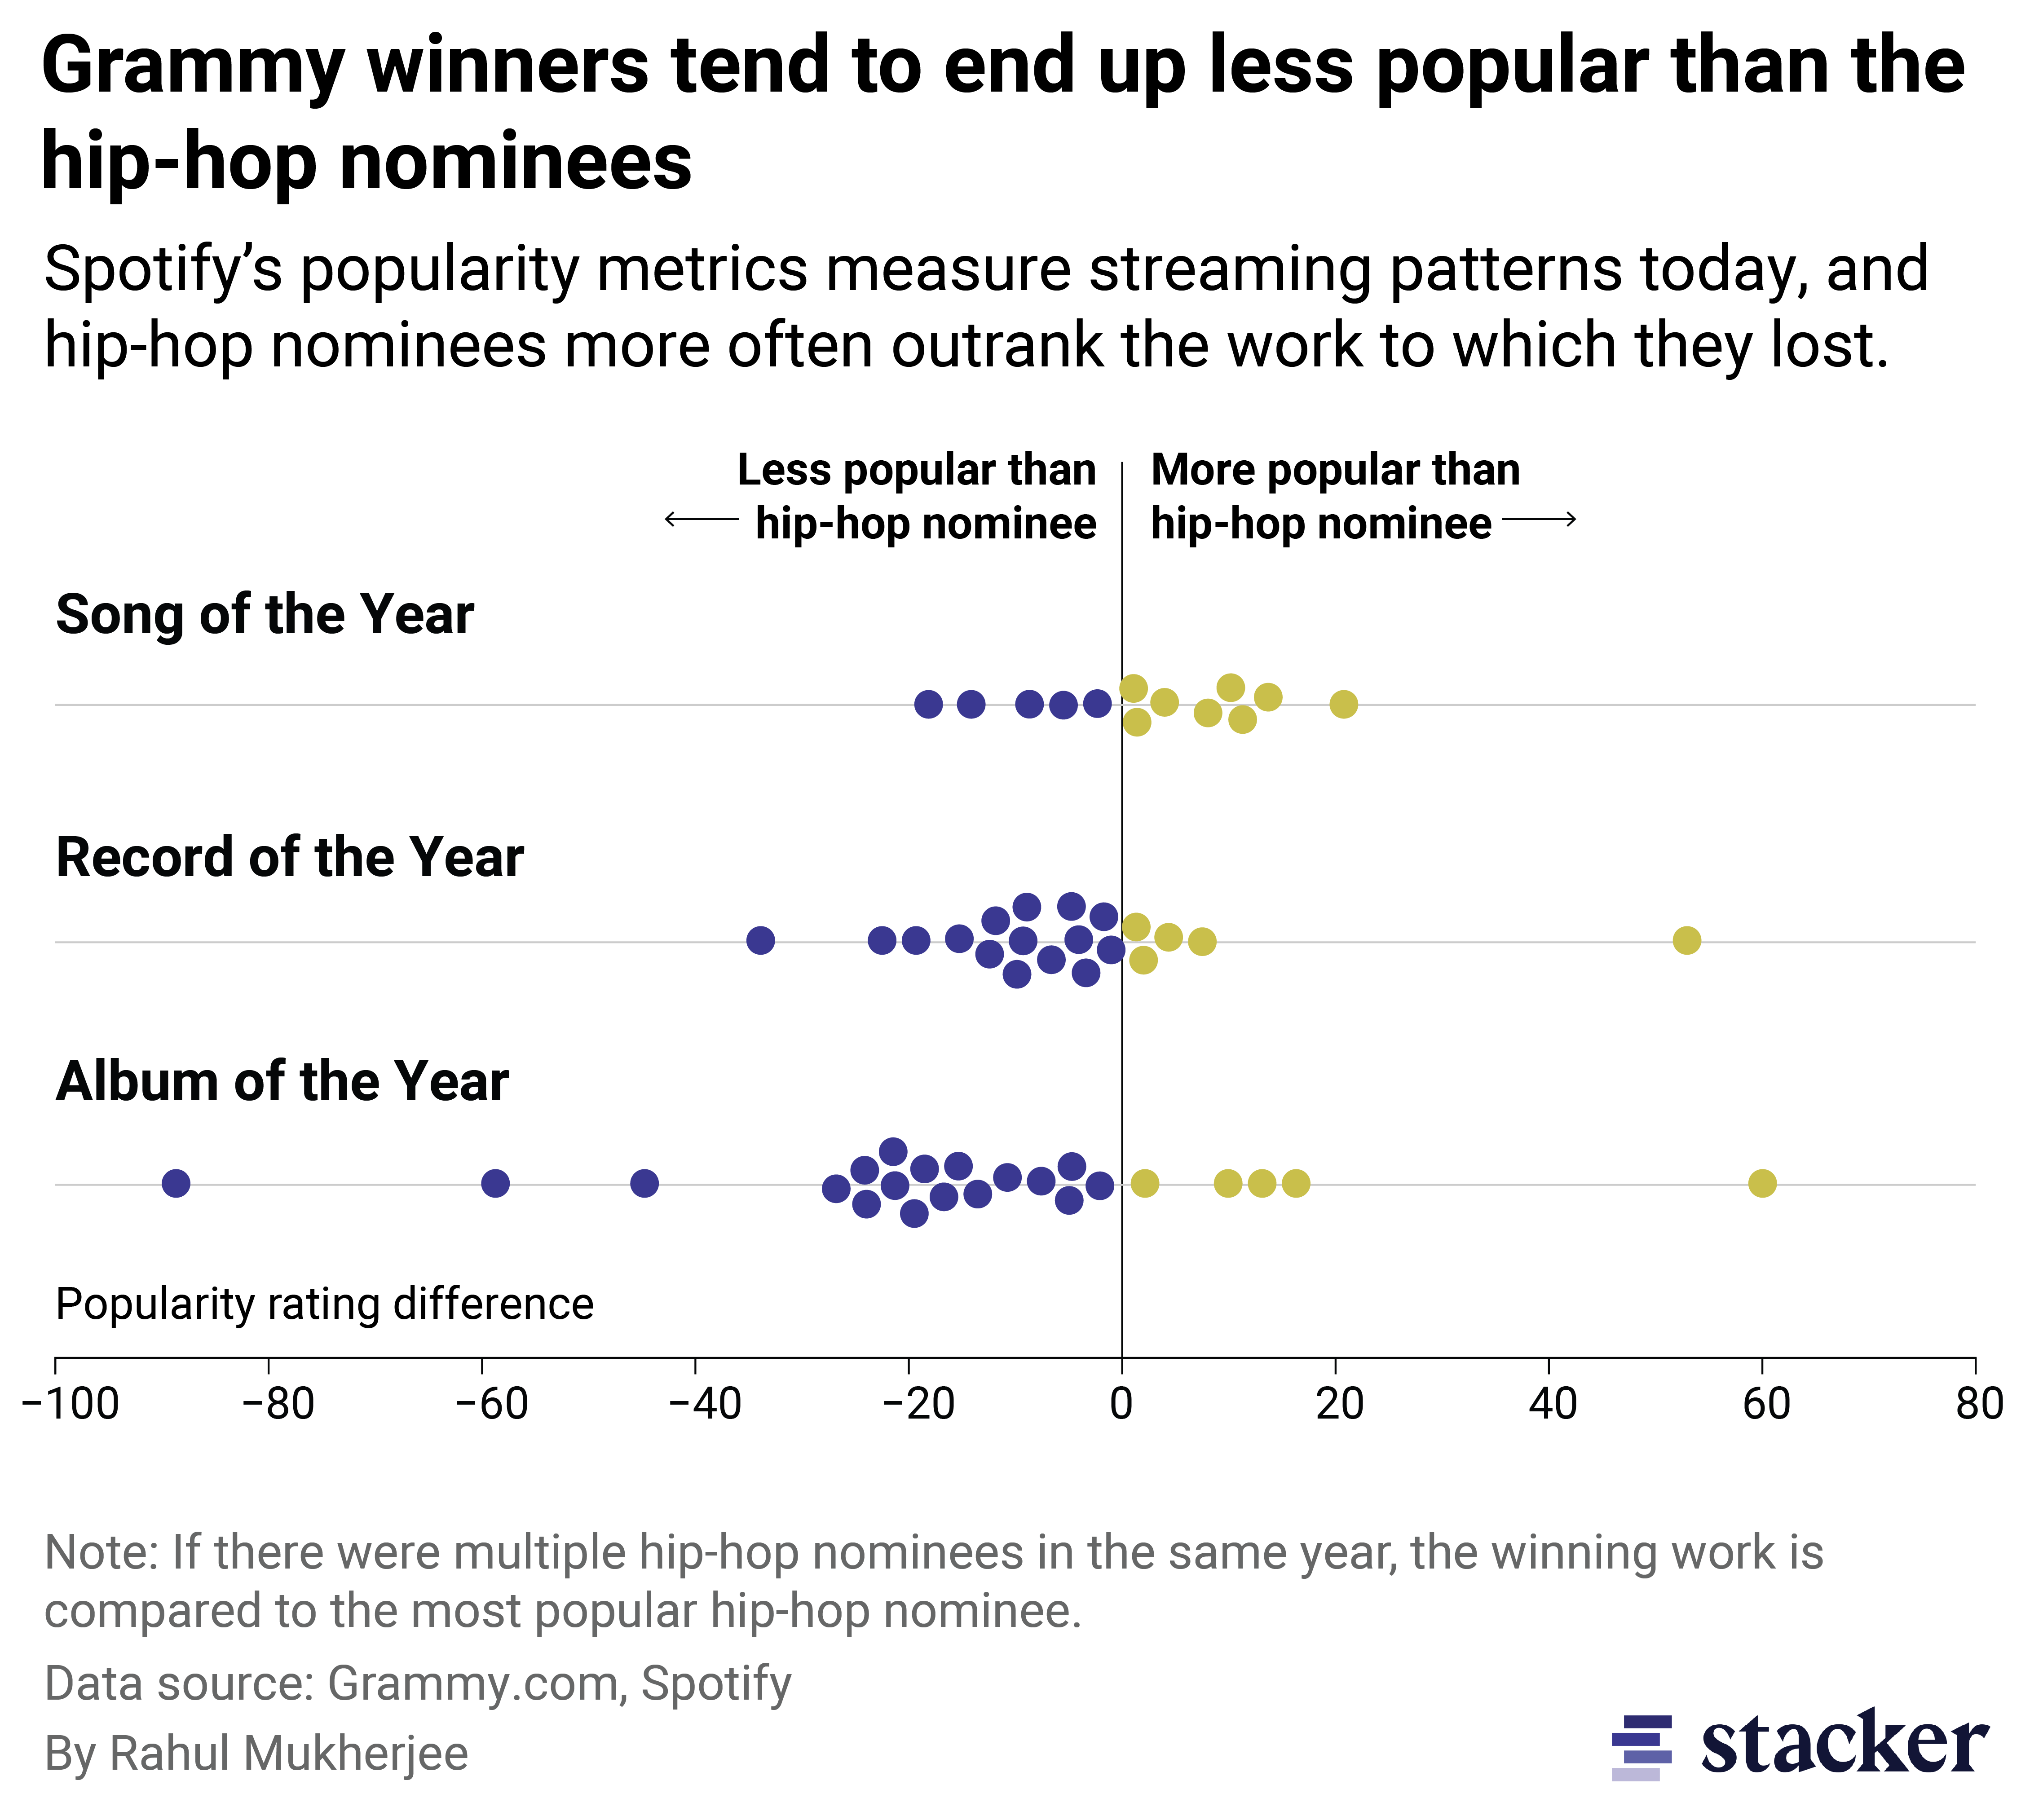 A bee swarm showing how winners have fared in popularity compared to the hip hop nominees they lost. Most winners don’t become as popular, with 18 of 22 album of the year winners are in the shadows of hip-hop records they lost to.